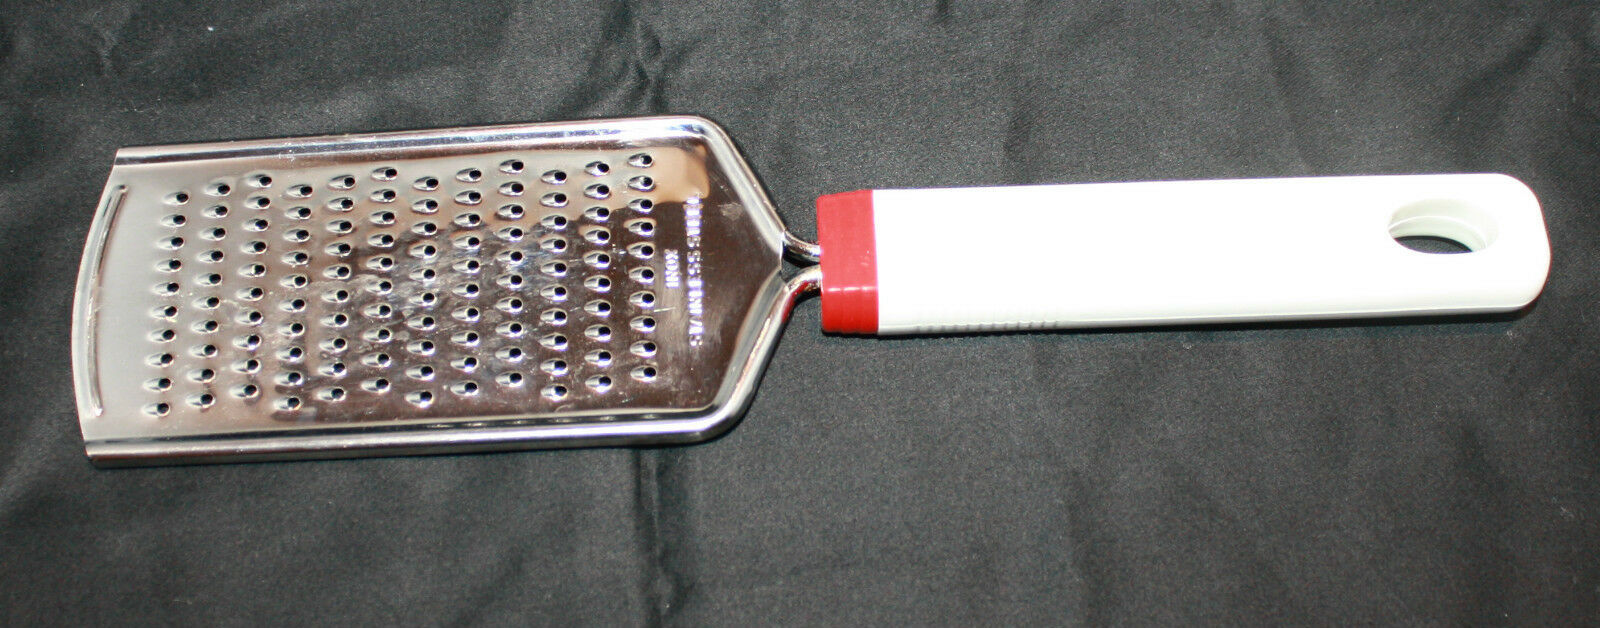 Inox Stainless Steel Cheese Grater Plastic Handle White Red 9.5 Inch  - $23.87